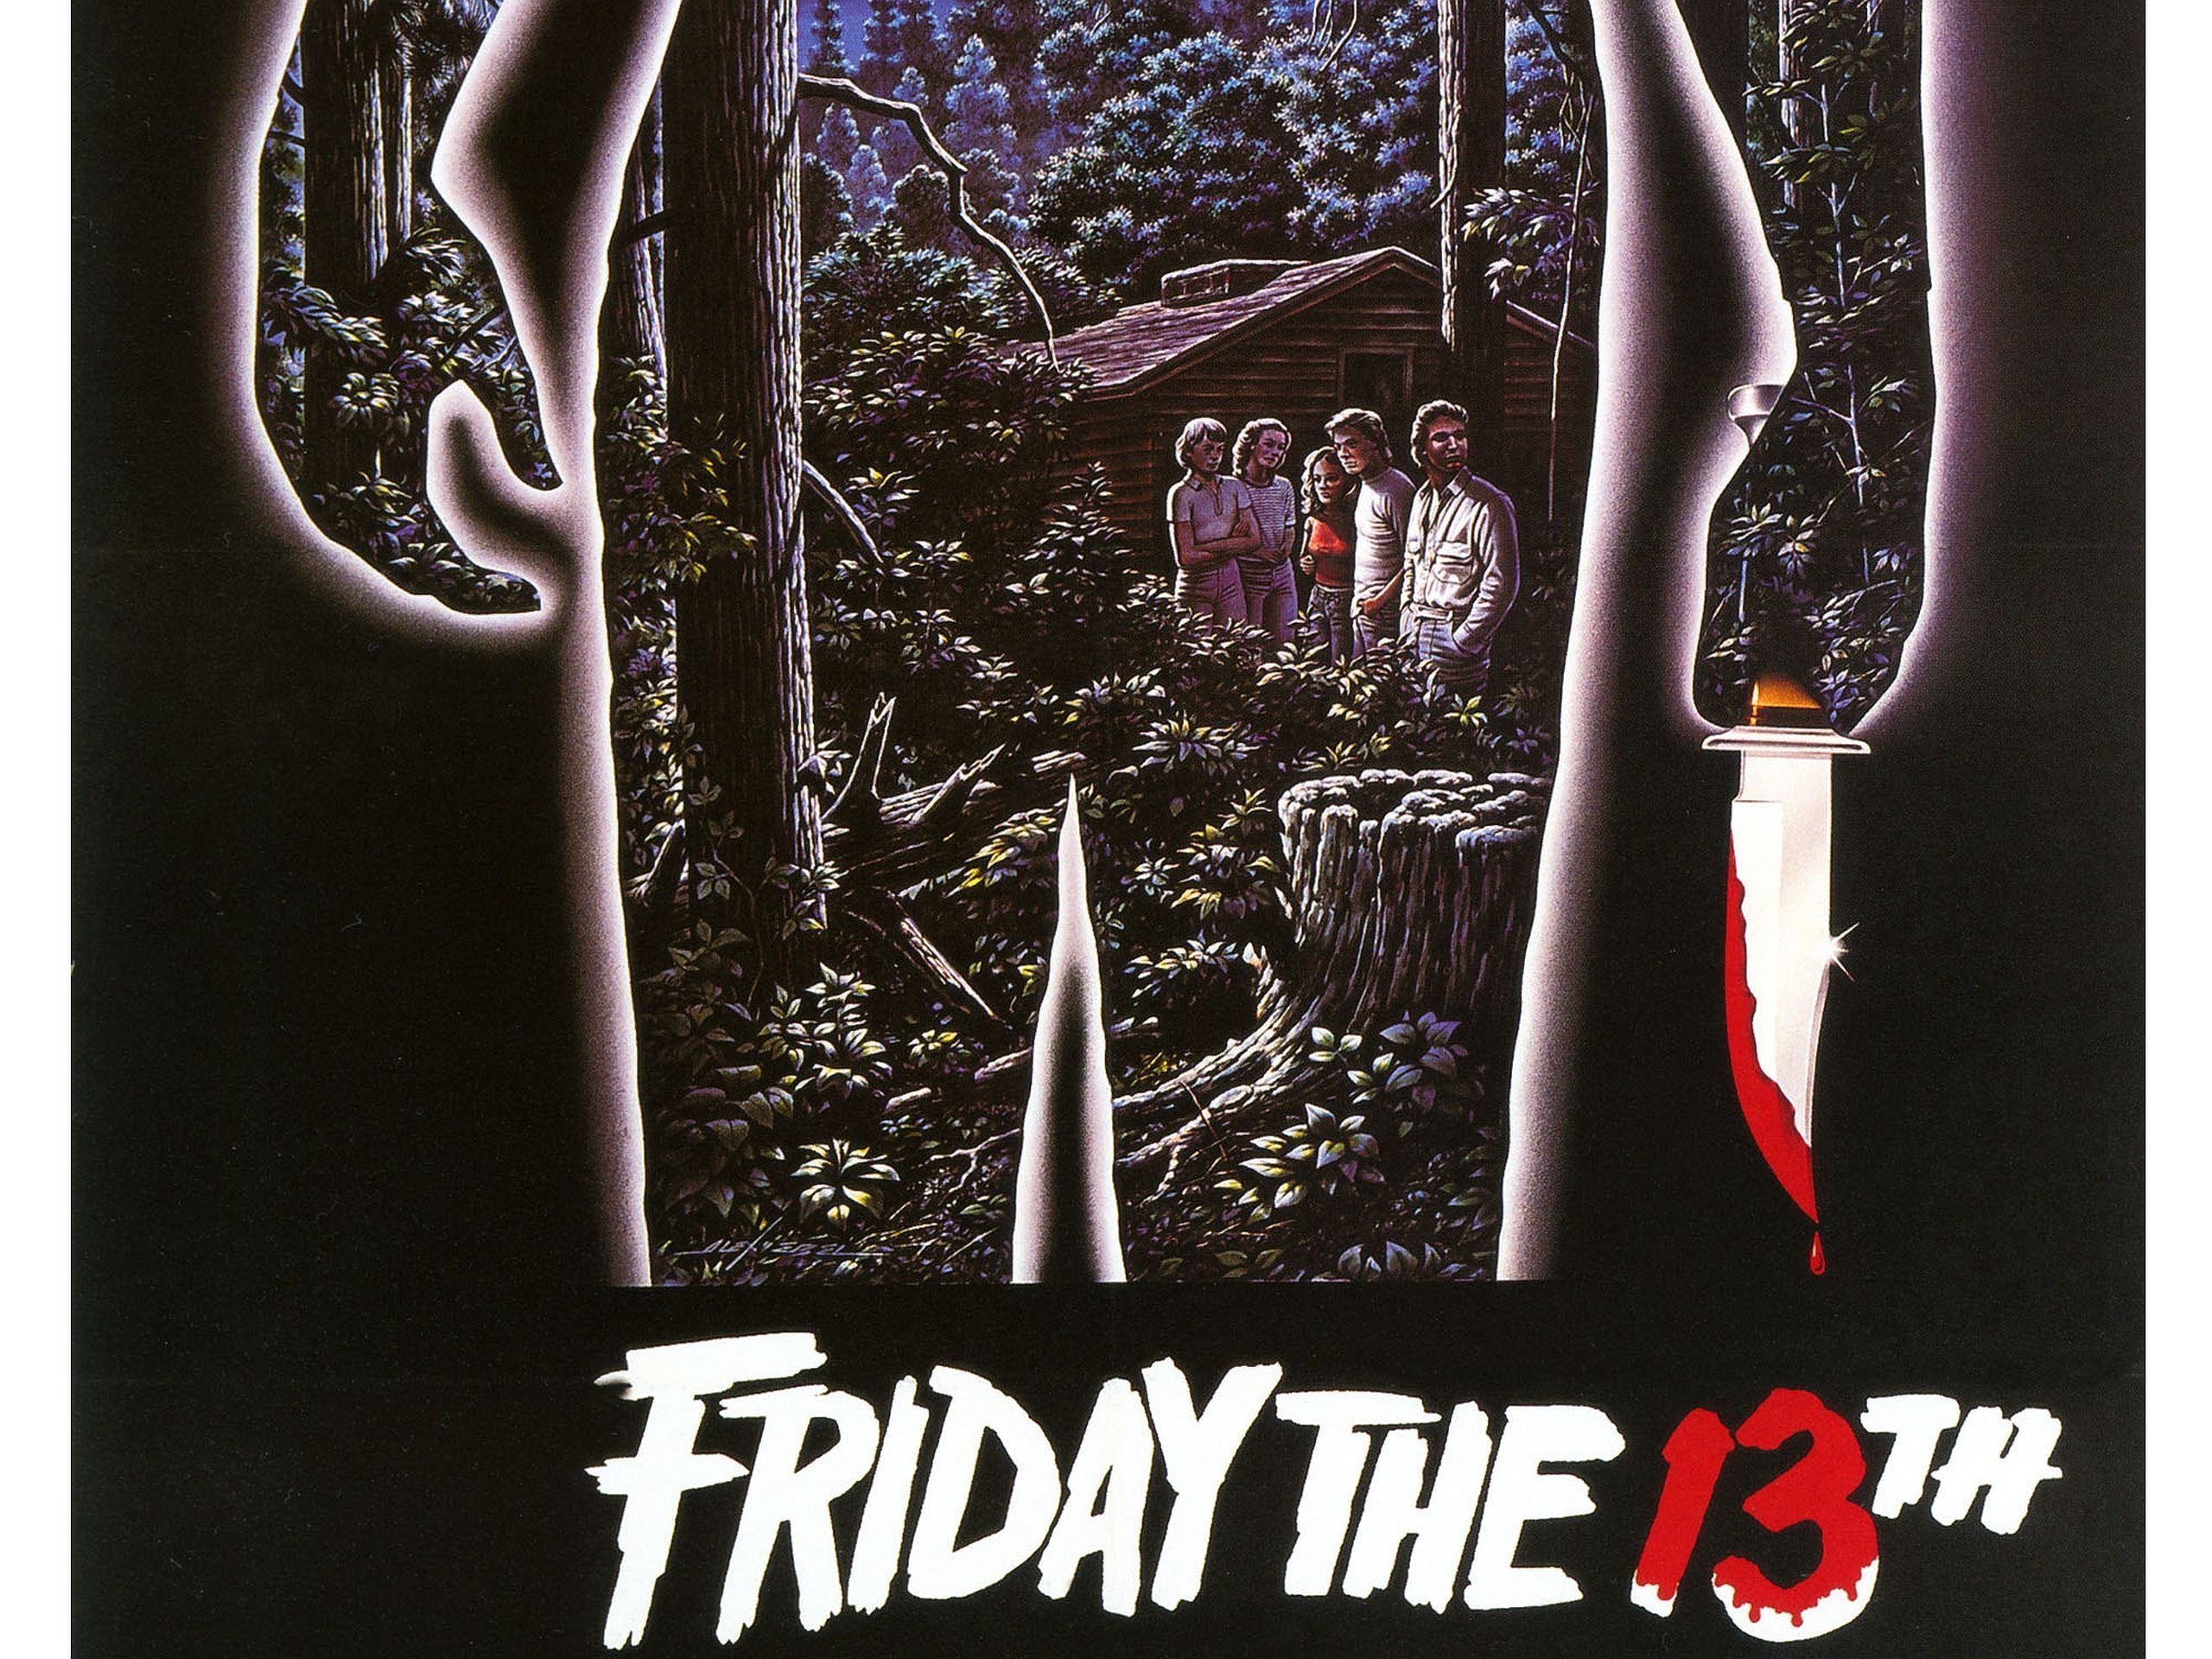 Friday the 13th Wallpapers - Friday the 13th Wallpaper (36487601 ...